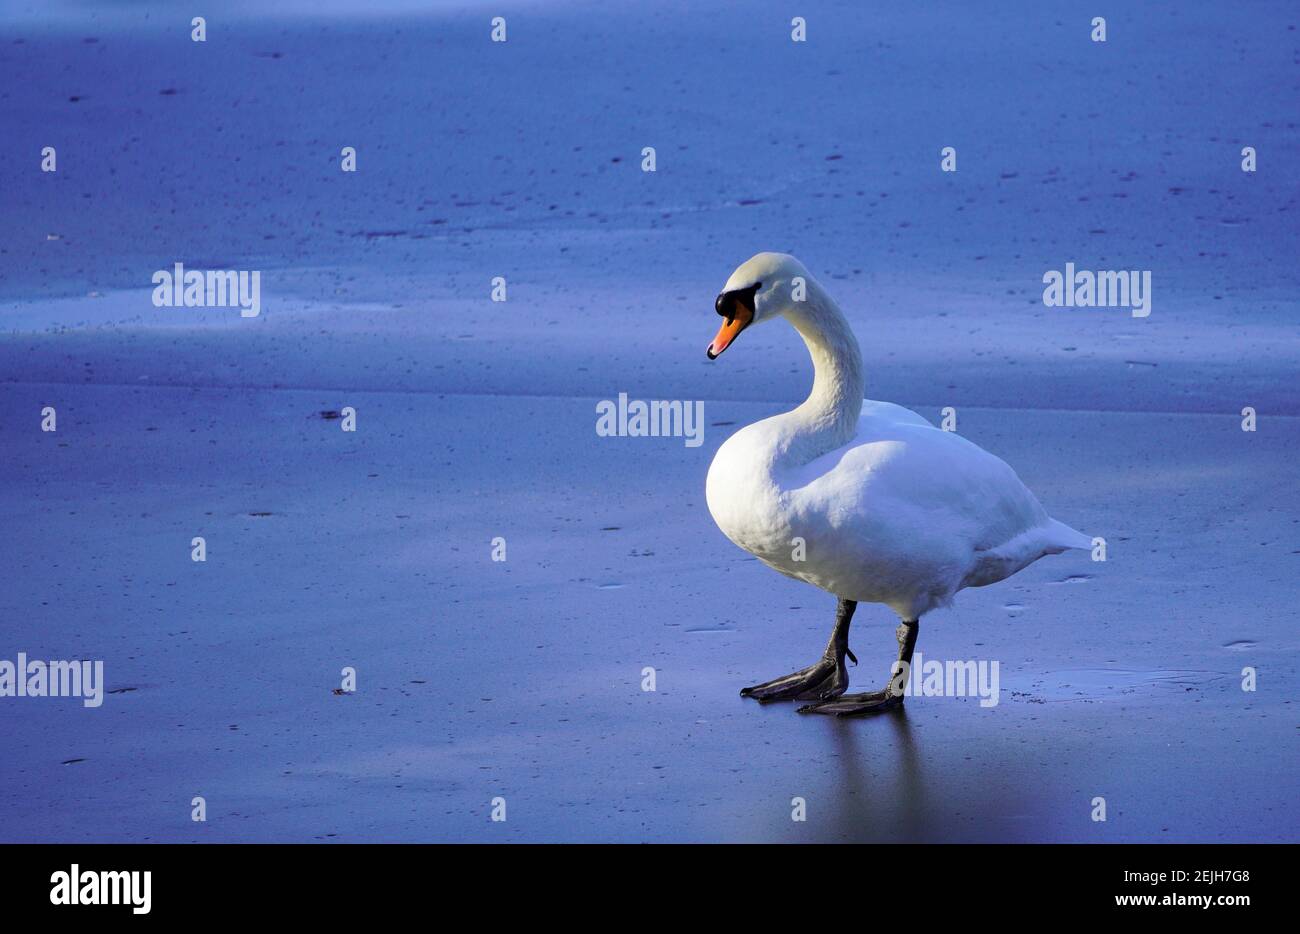 White swan on a frozen lake. Frozen blue water surface of a pond with a swan in the center. Stock Photo